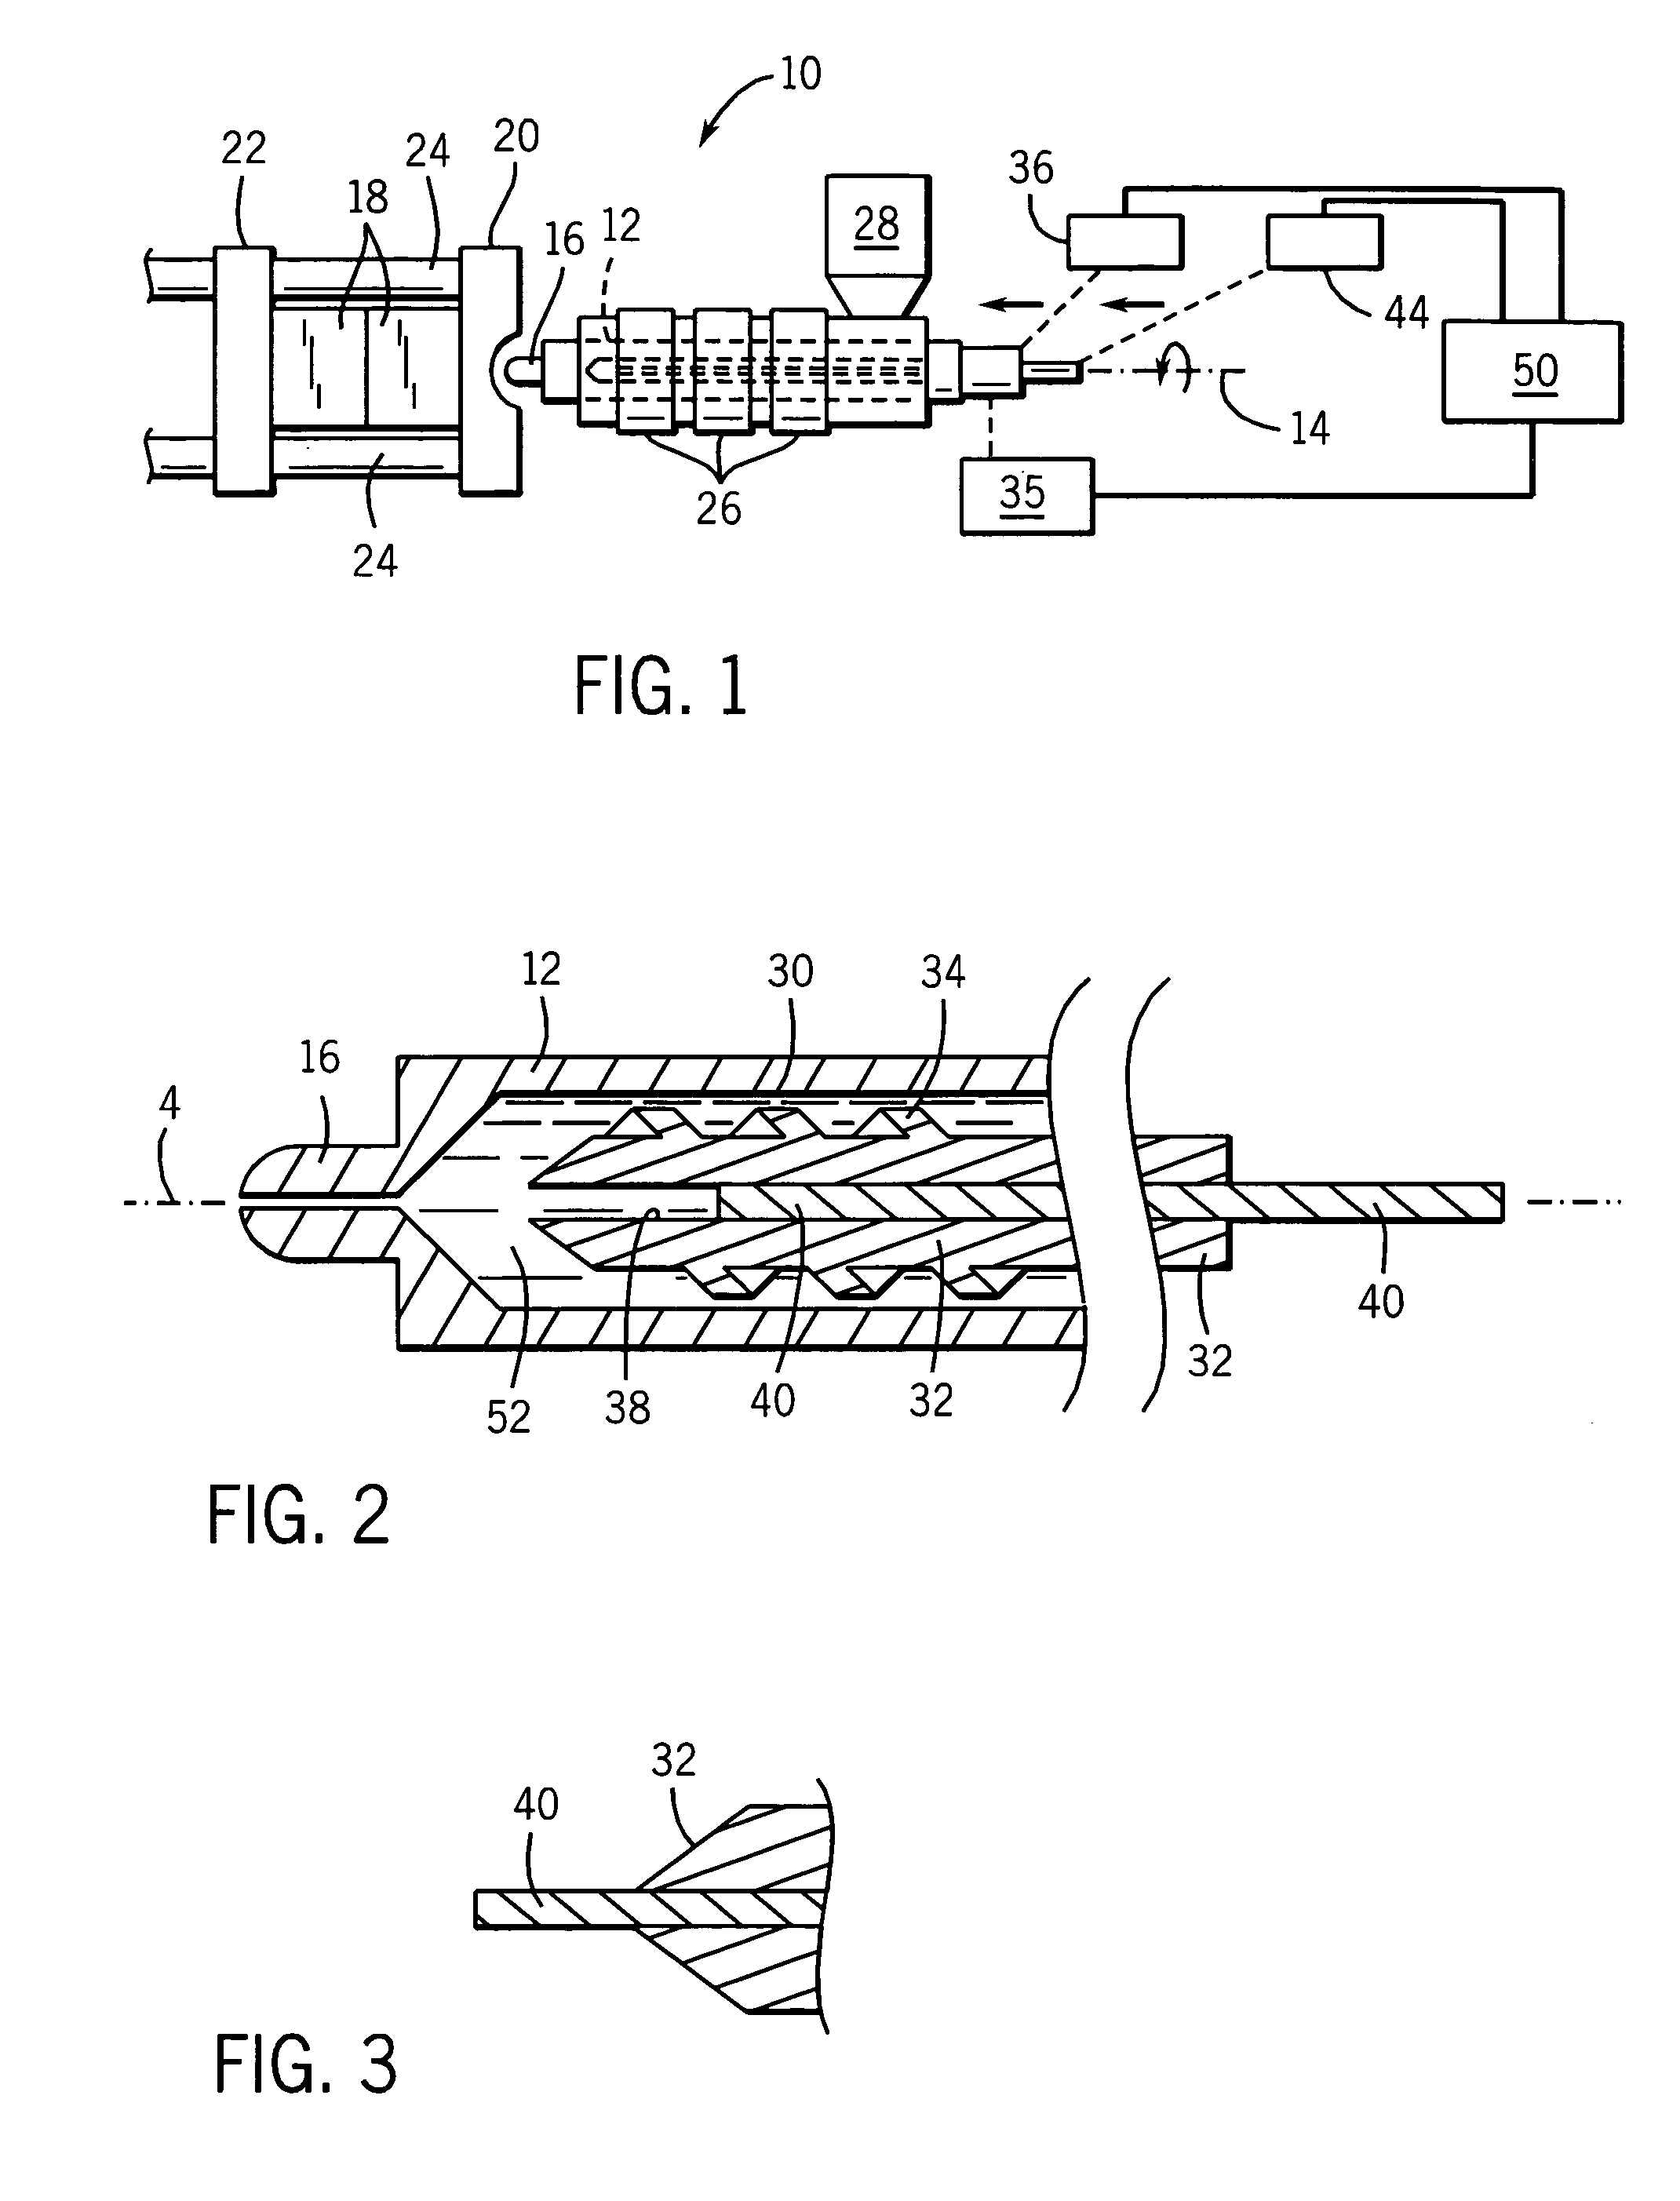 Coaxial injector screw providing improved small shot metering